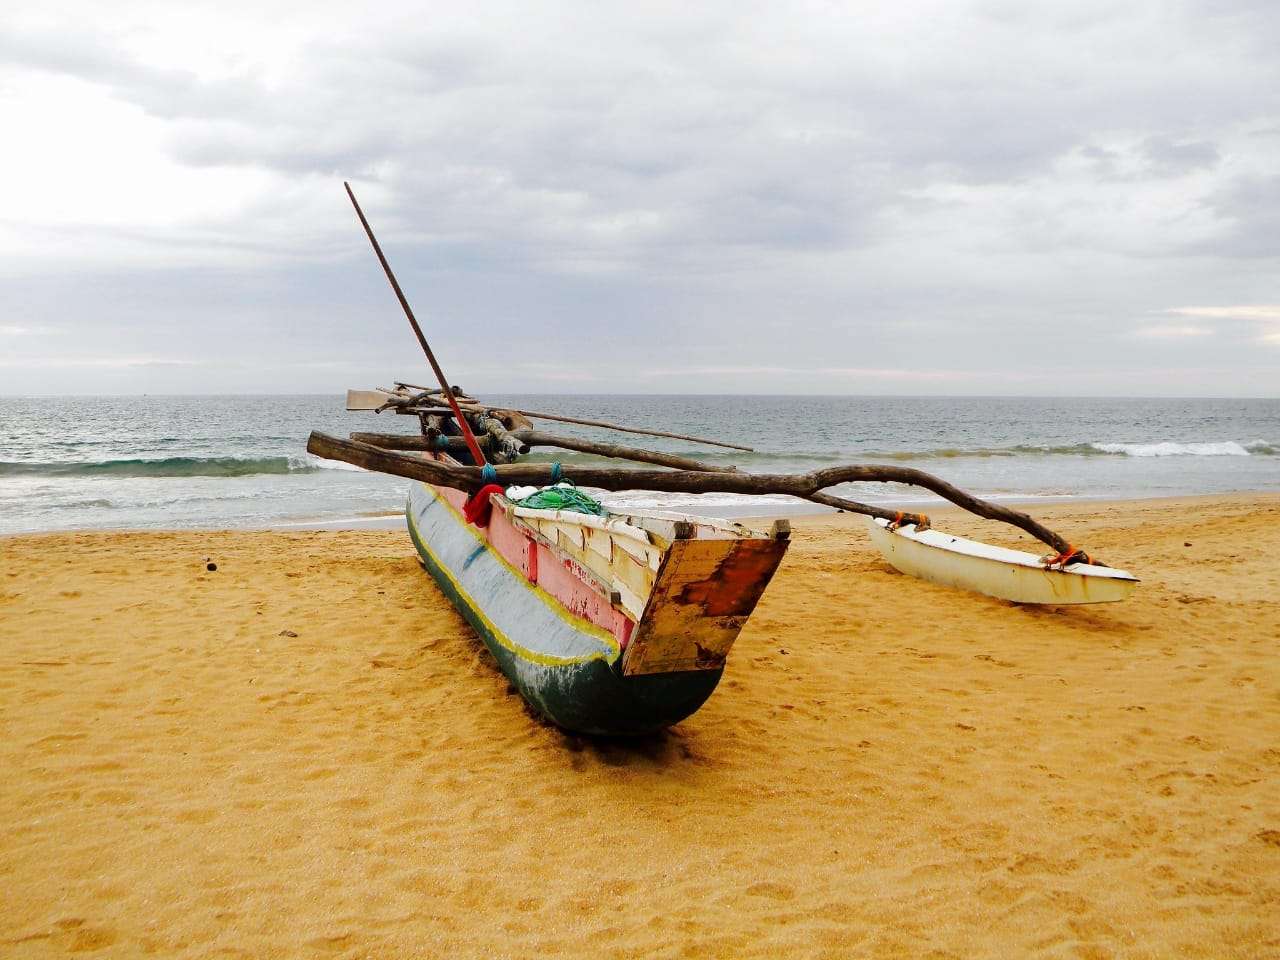 Sri Lanka, a jewel in the Indian Ocean, is blessed with breathtaking landscapes and stunning beaches. Hikkaduwa beach